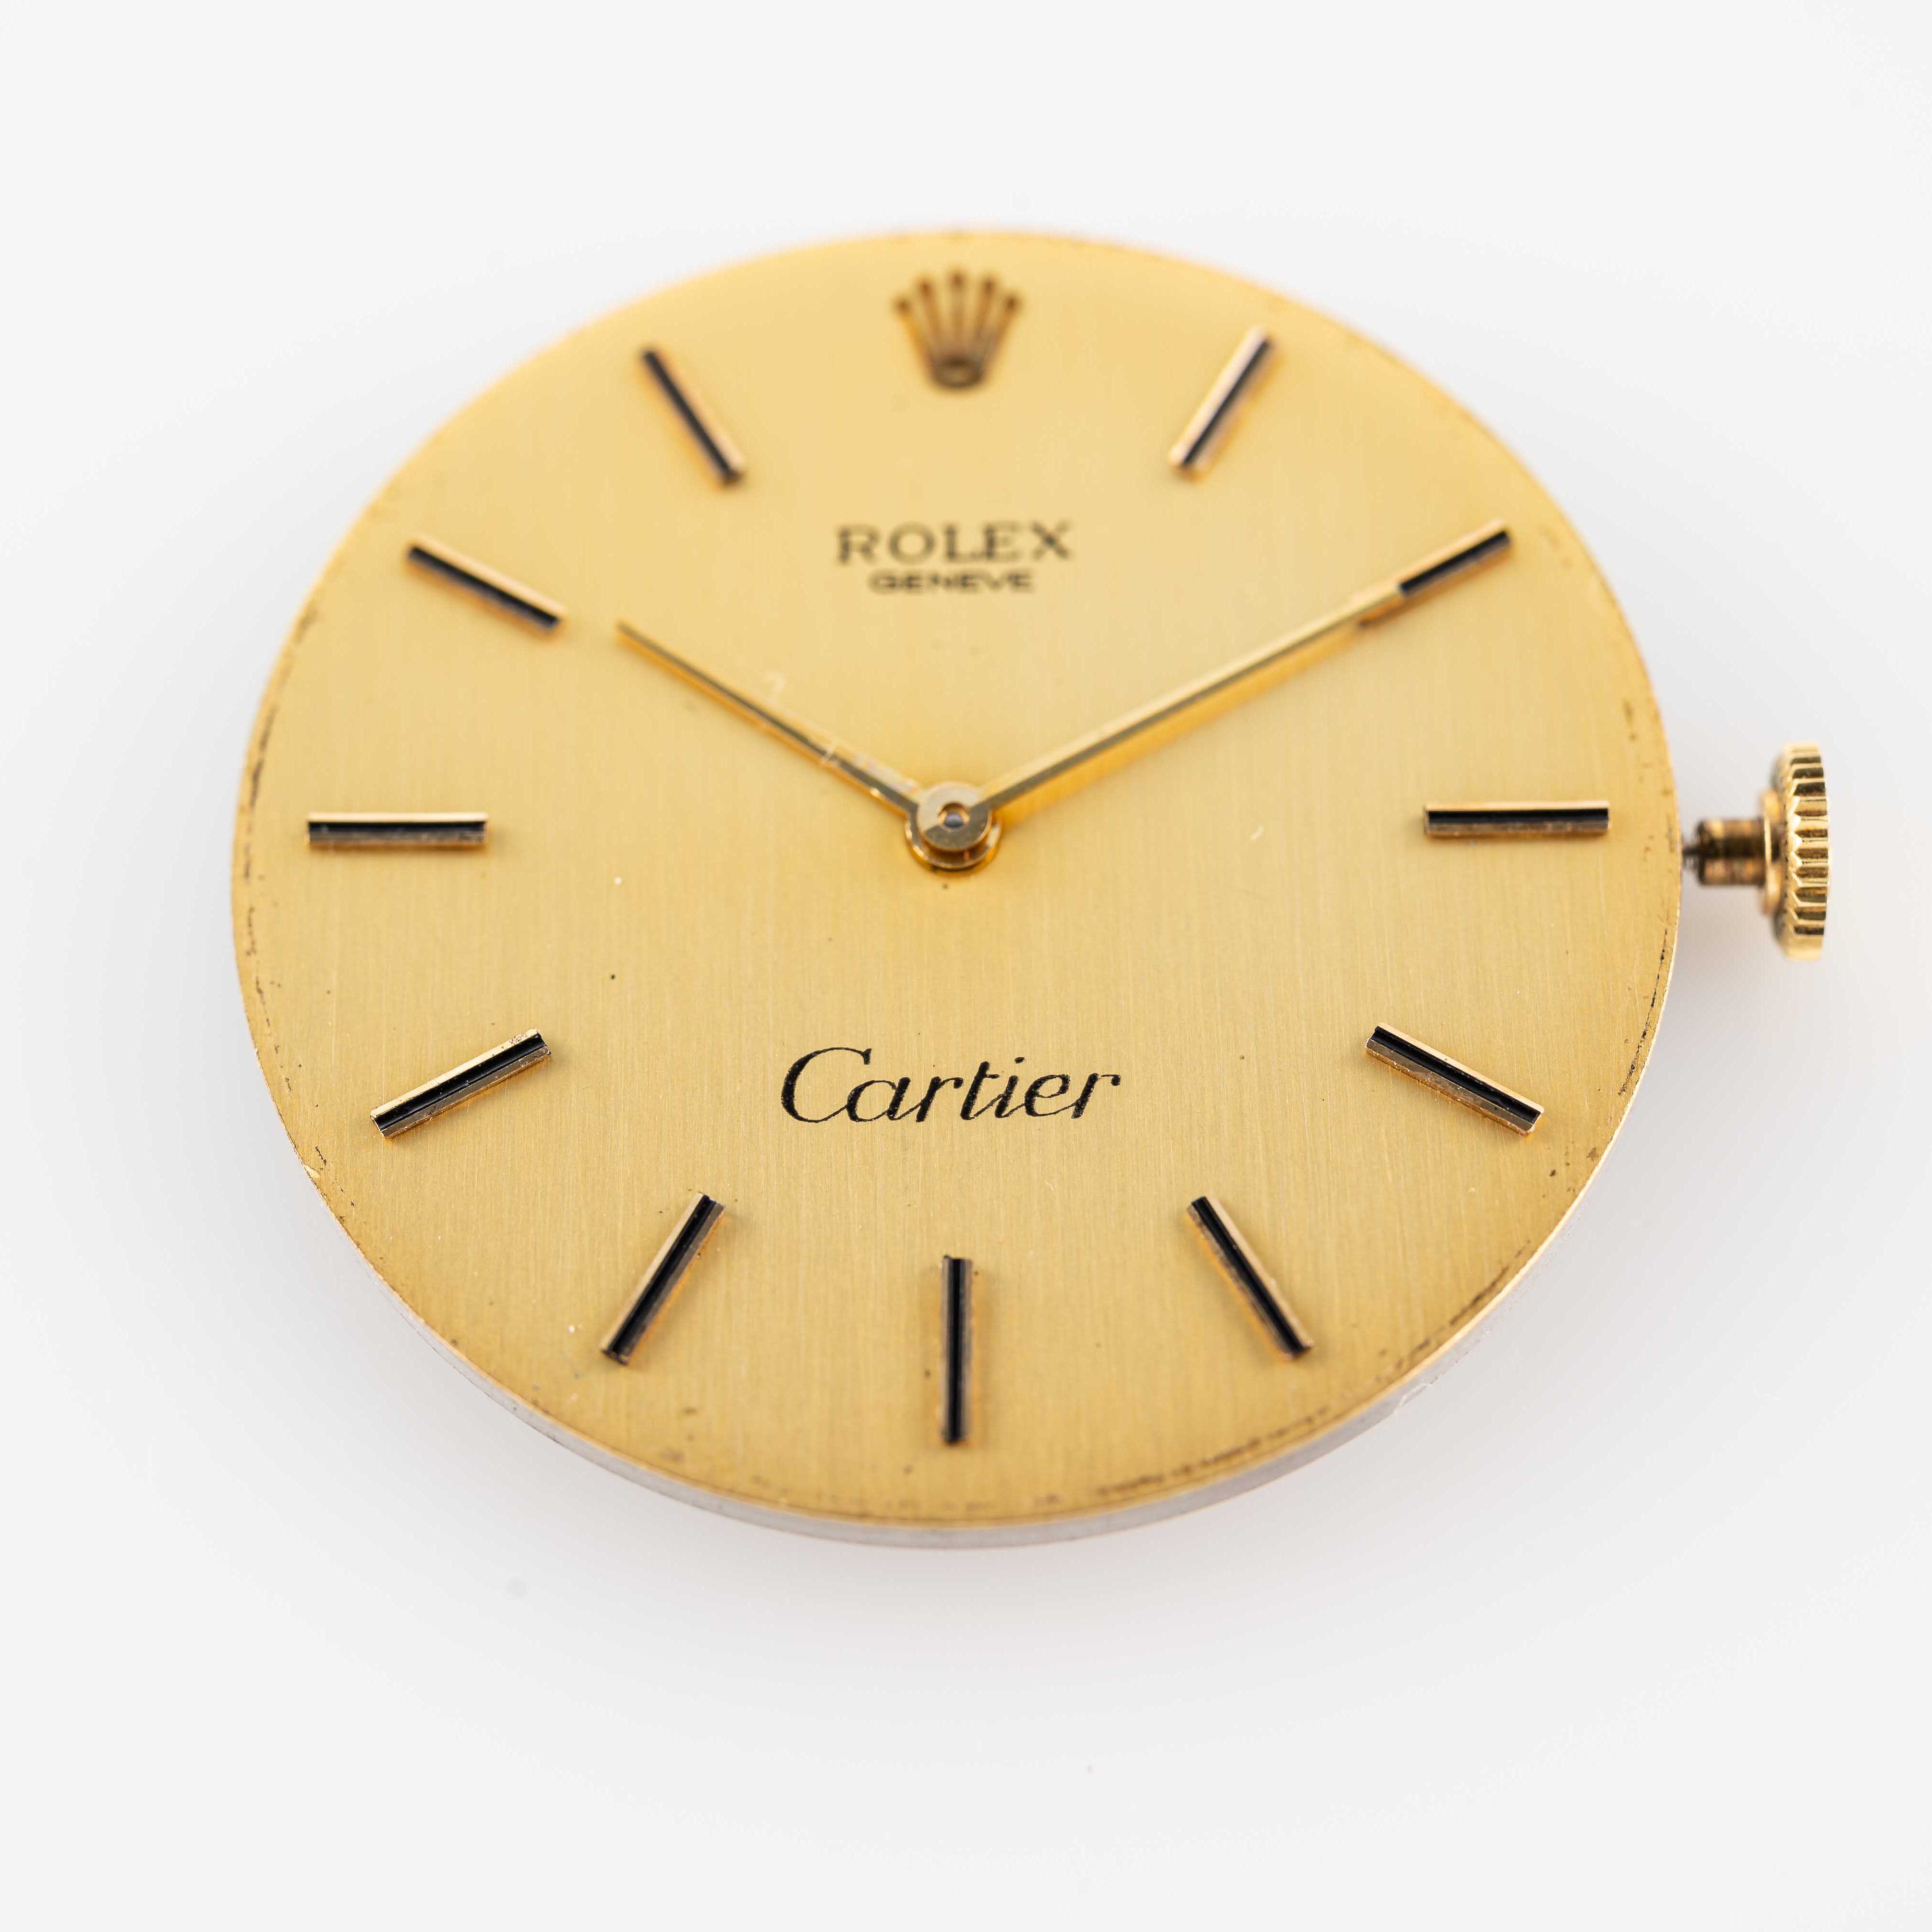 A RARE SOLID GOLD ROLEX BROACH WATCH CIRCA 1970s, ORIGINALLY RETAILED BY CARTIER WITH CO-SIGNED - Image 3 of 13